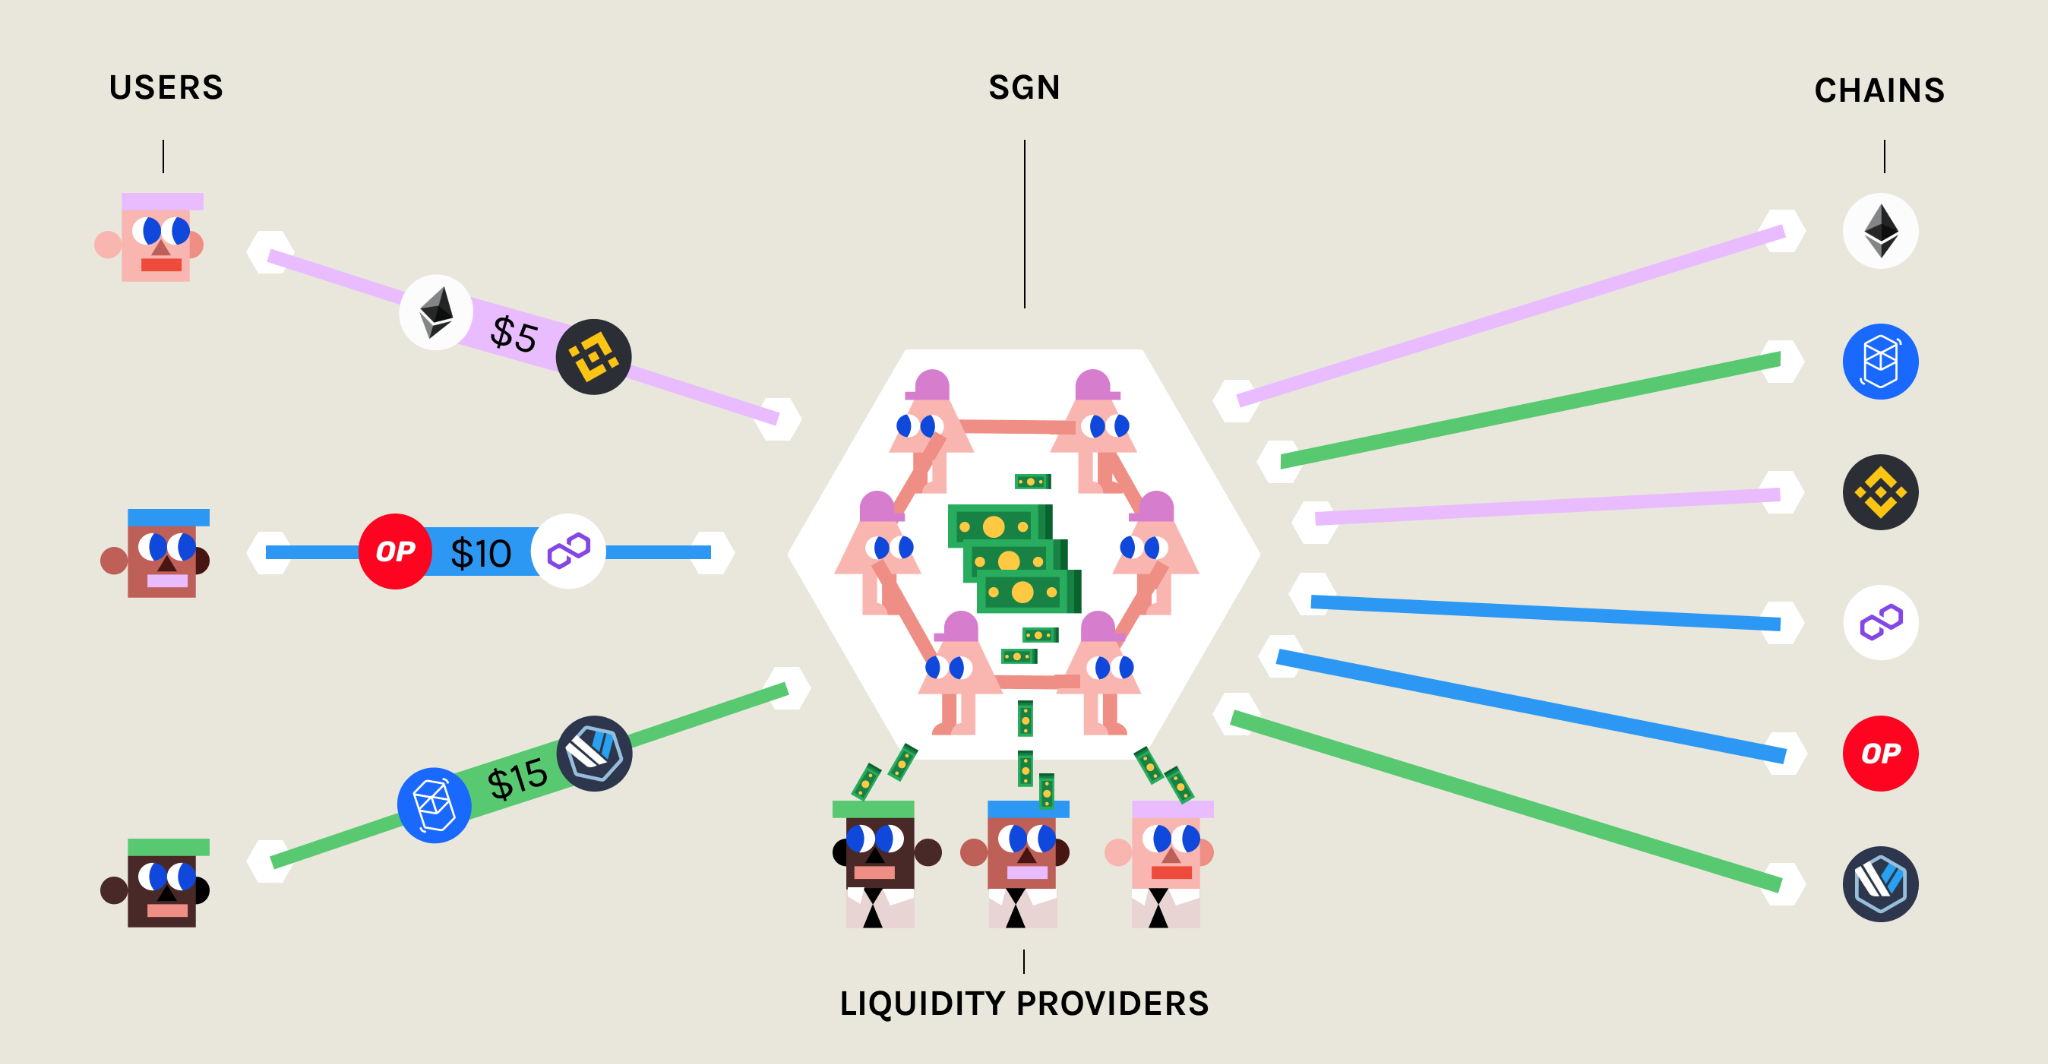 The SGN as a Shared Liquidity Pool Manager